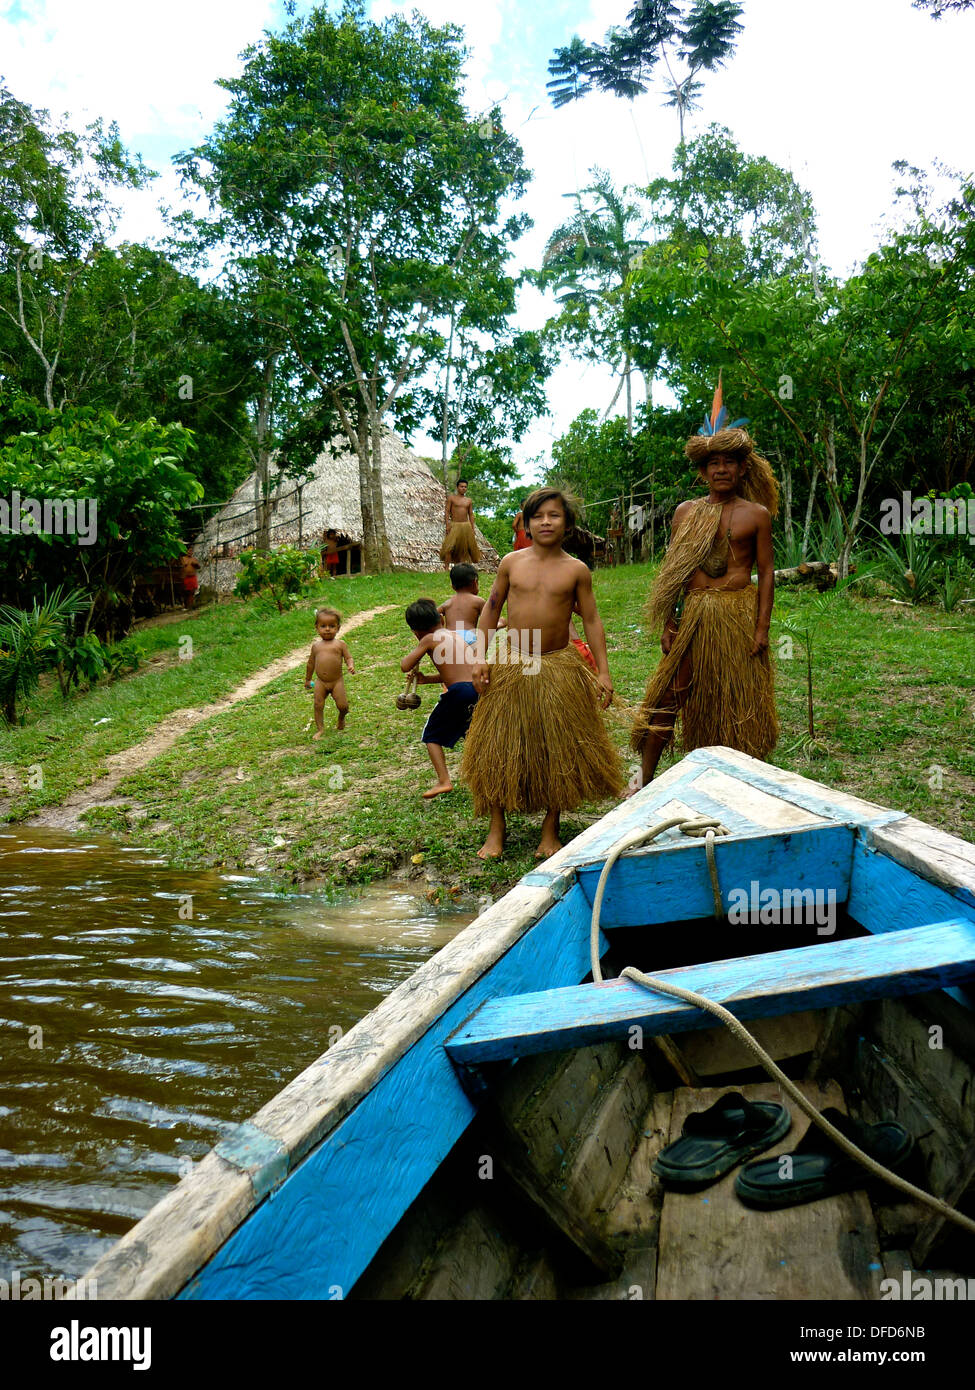 Children of the Yagua Tribe play with a wooden canoe in the Amazon rain forest near Iquitos, Peru Stock Photo